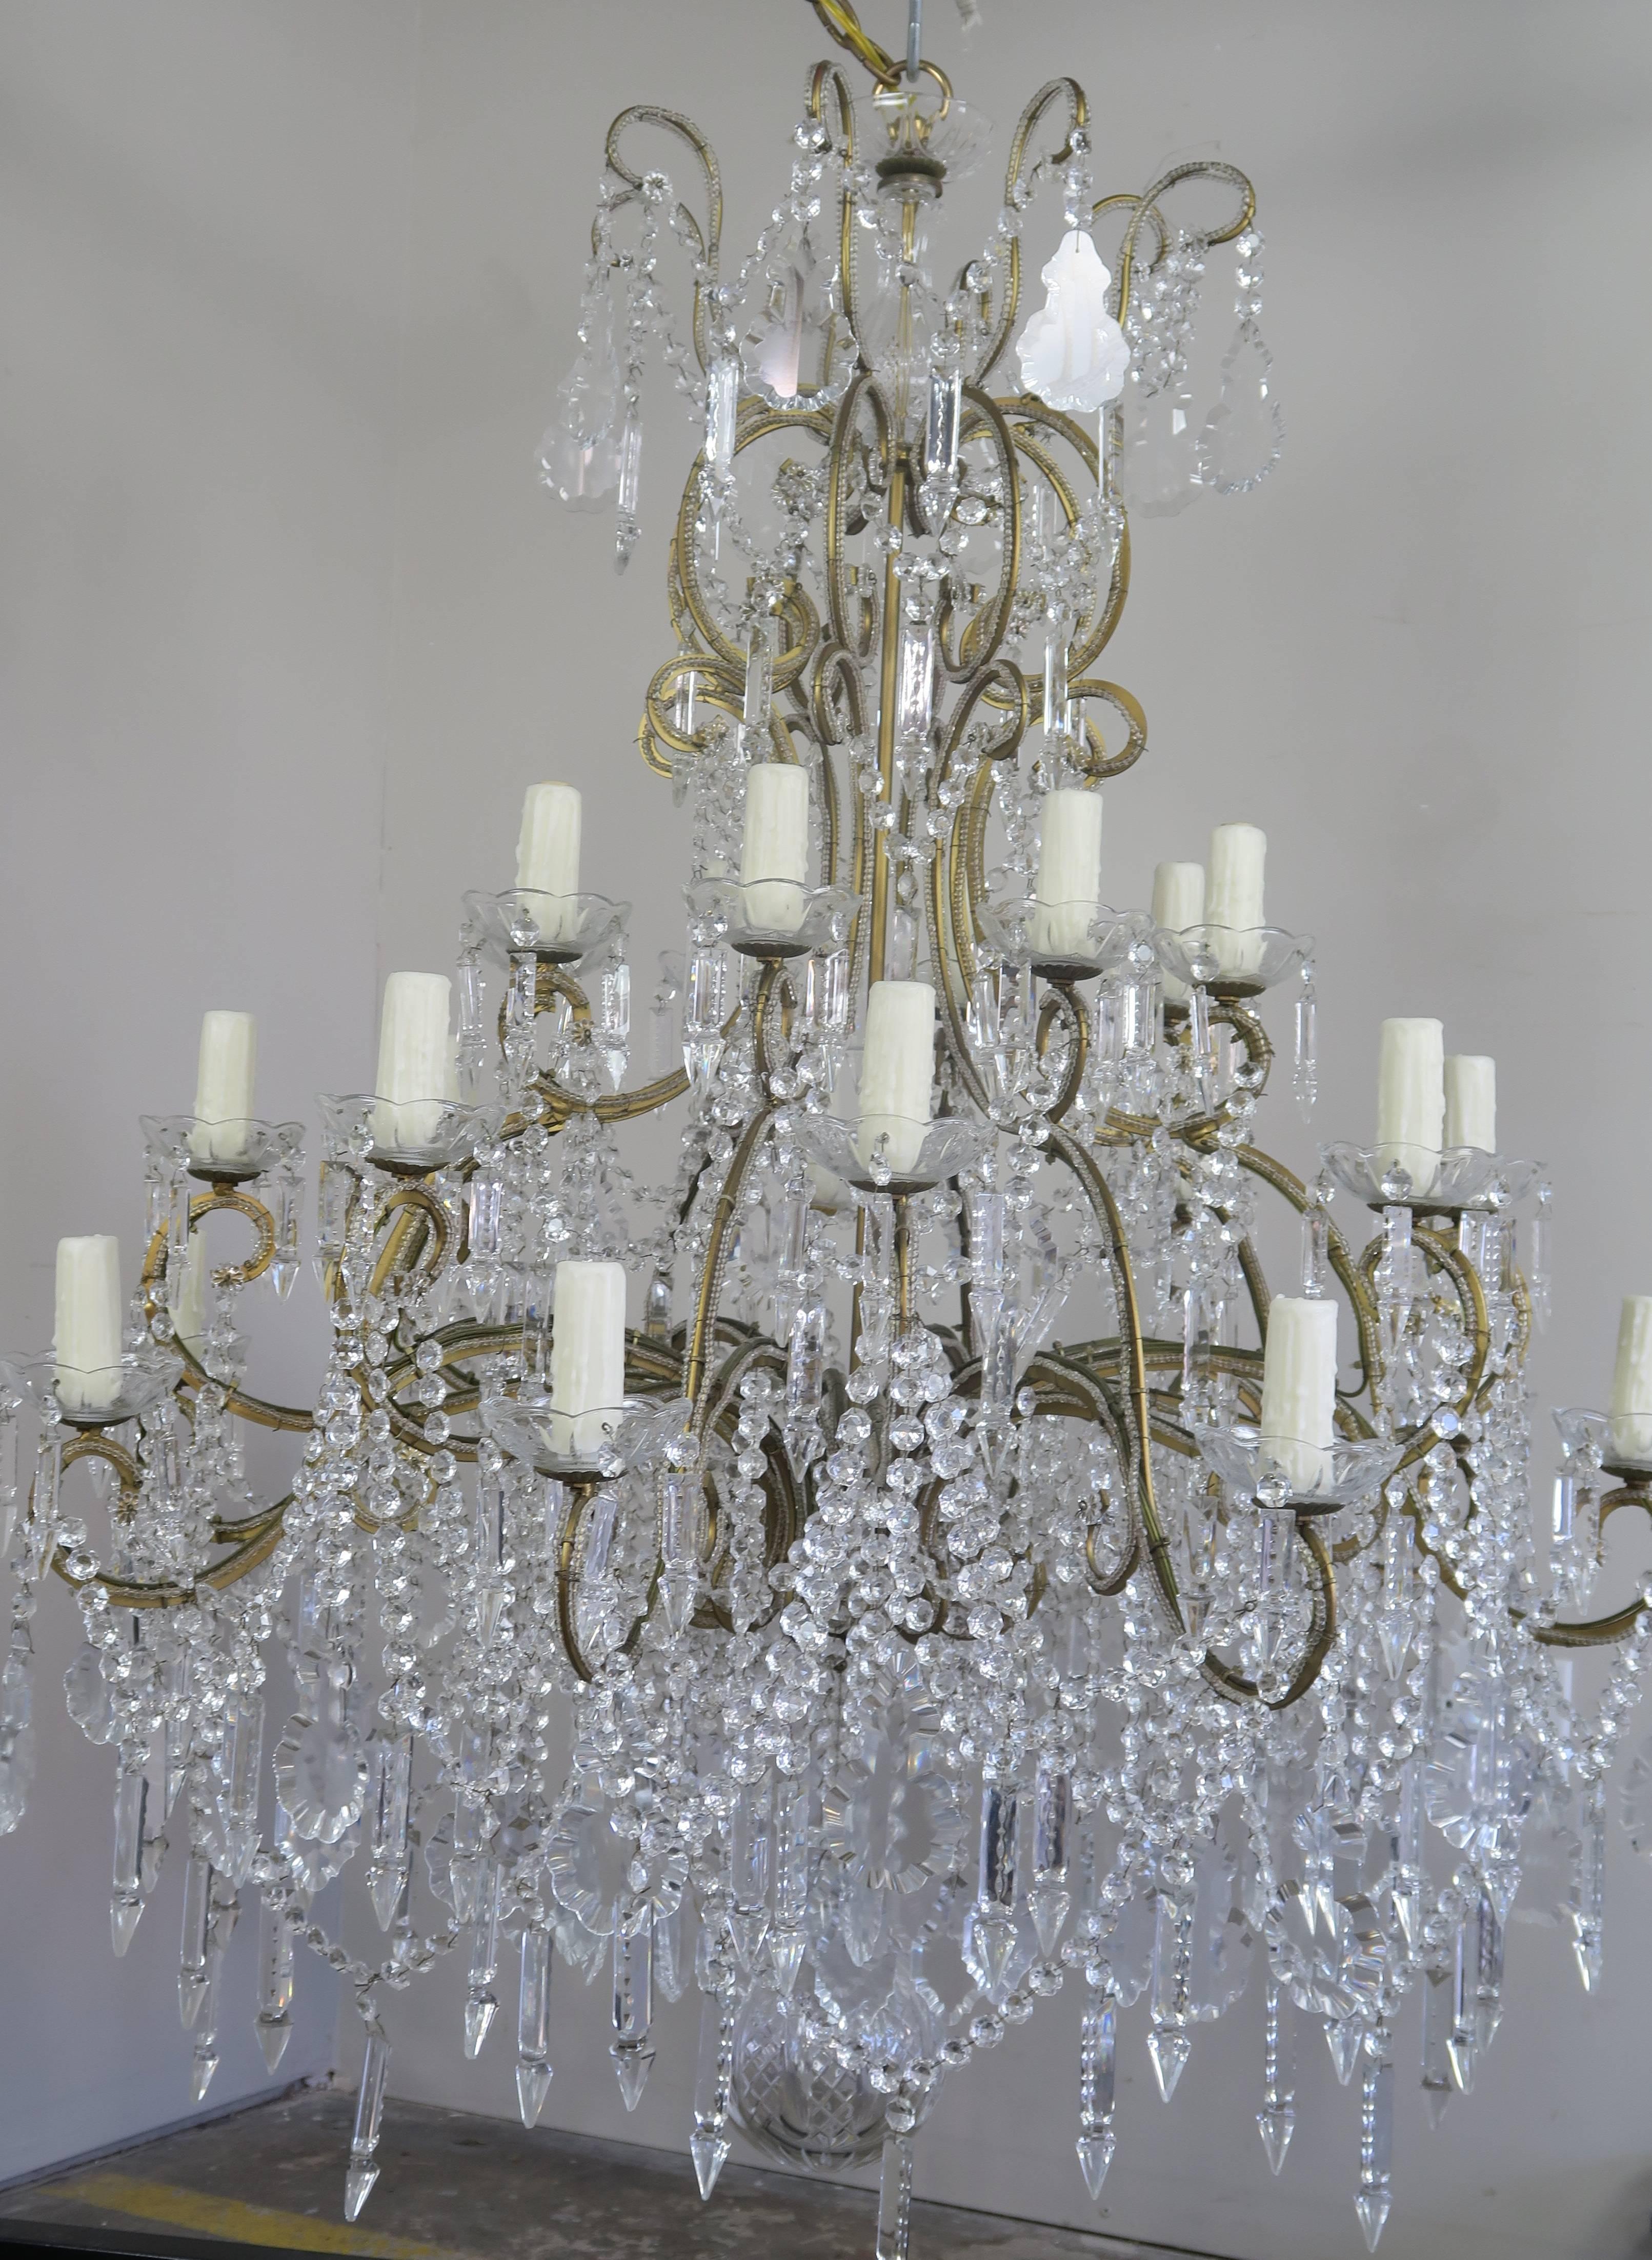 Monumental Italian 24 light crystal beaded arm chandelier adorned with garlands of crystal swags, crystal spheres, and crystal pendants throughout. The fixture is wired with new drip wax candle covers that sit on crystal bobeche. The cut crystal